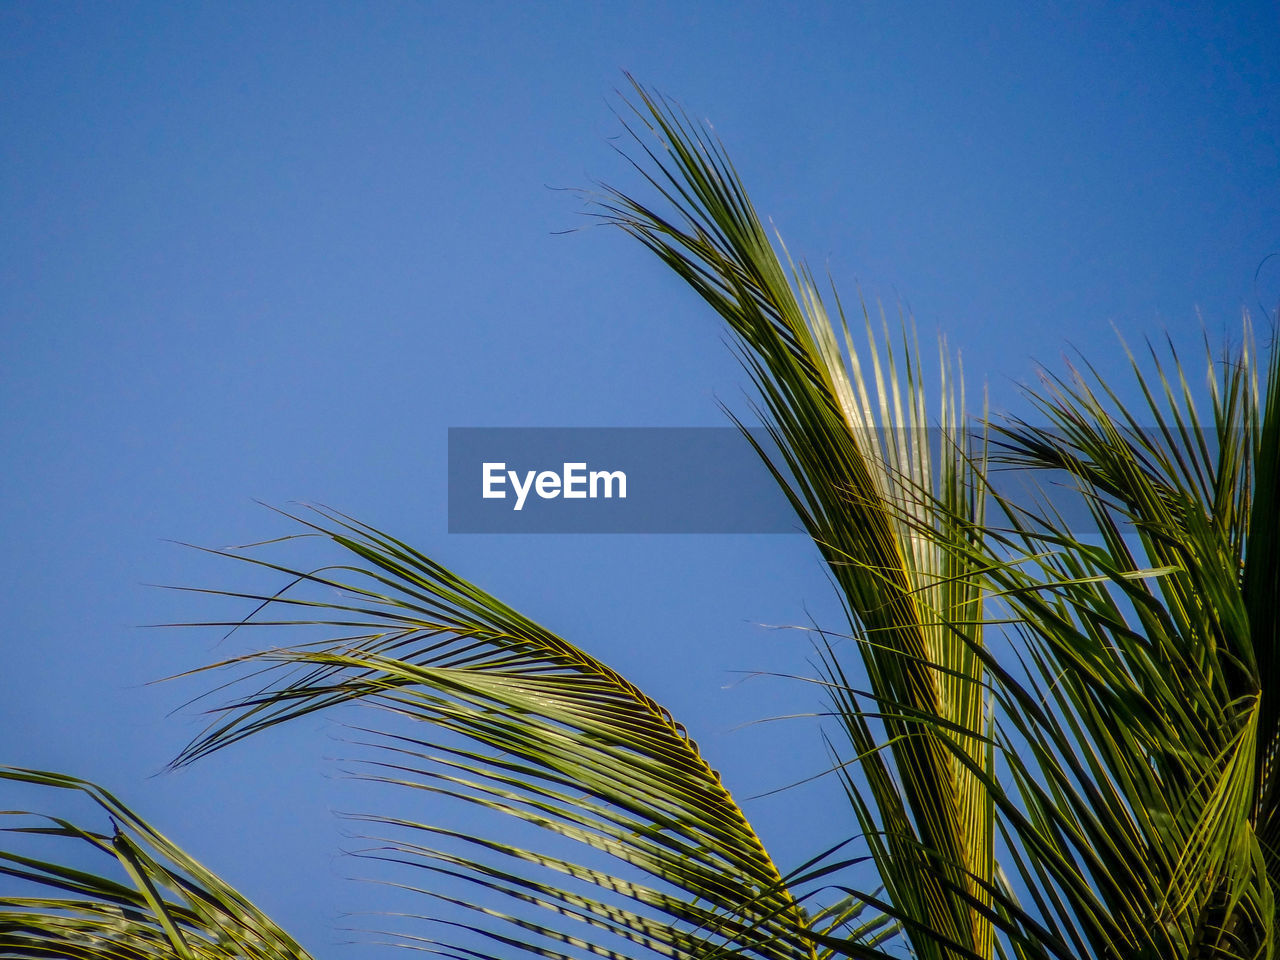 Low angle view of coconut stalks against blue sky